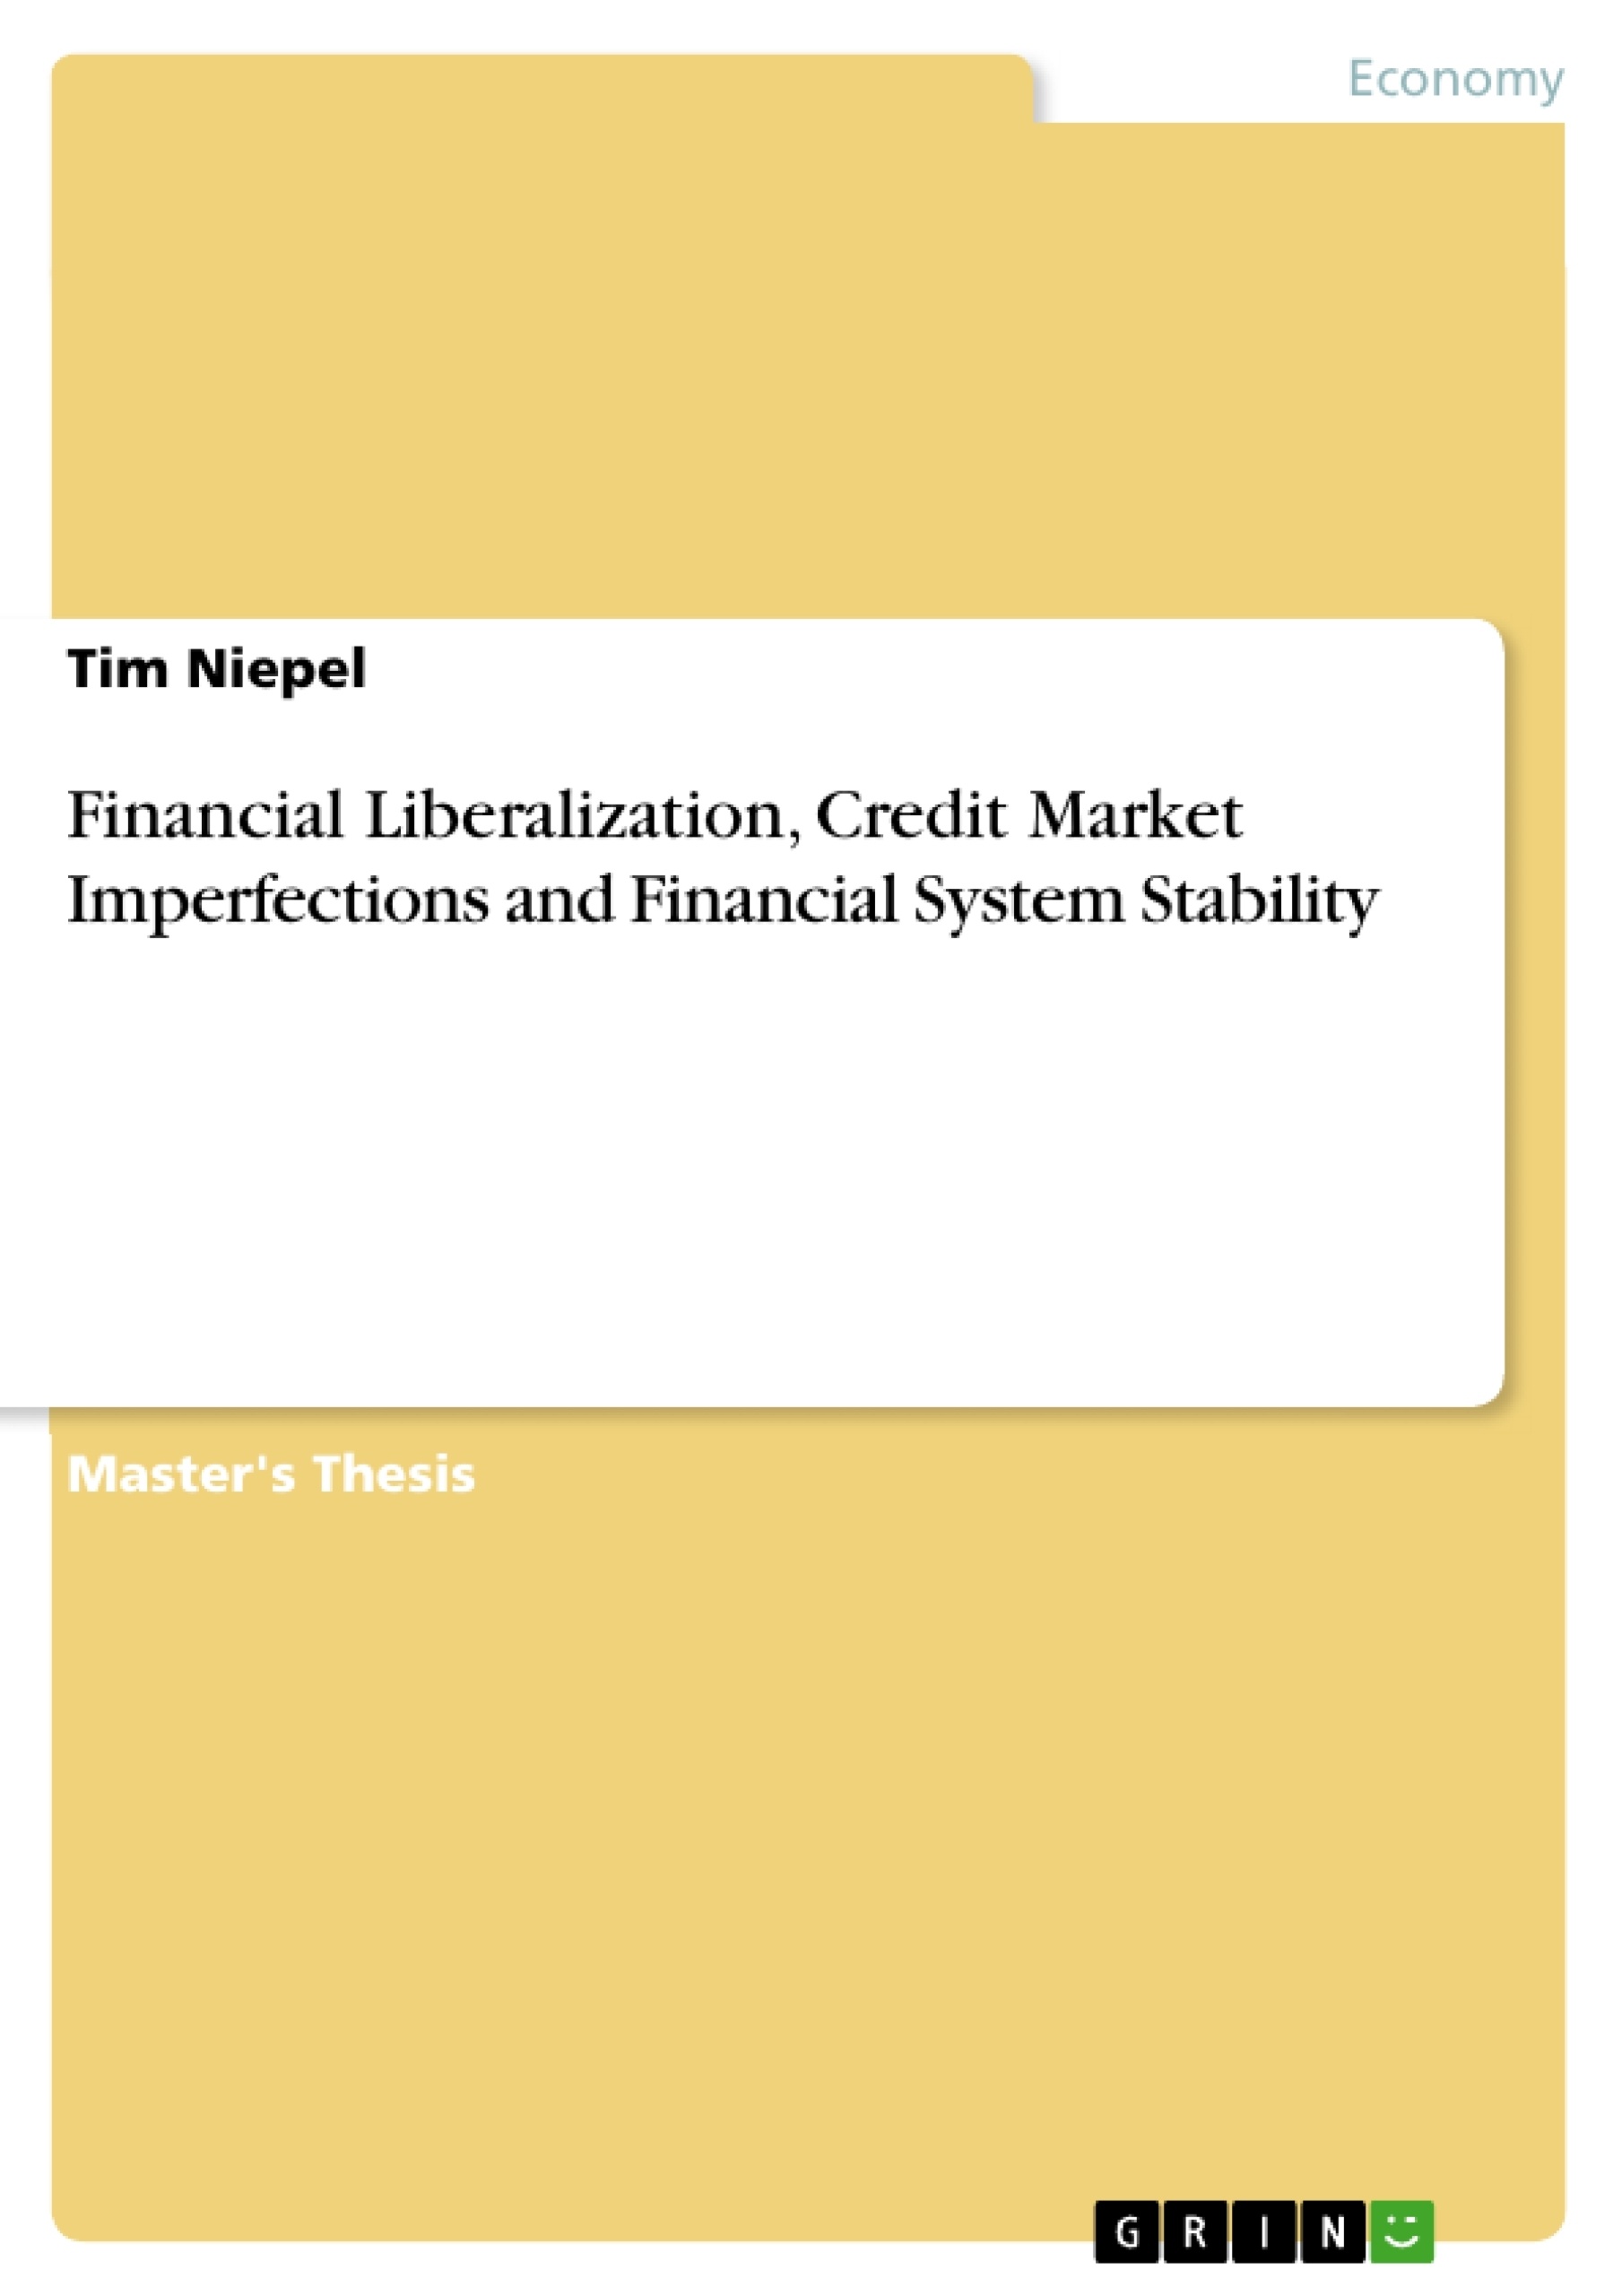 Titel: Financial Liberalization, Credit Market Imperfections and Financial System Stability